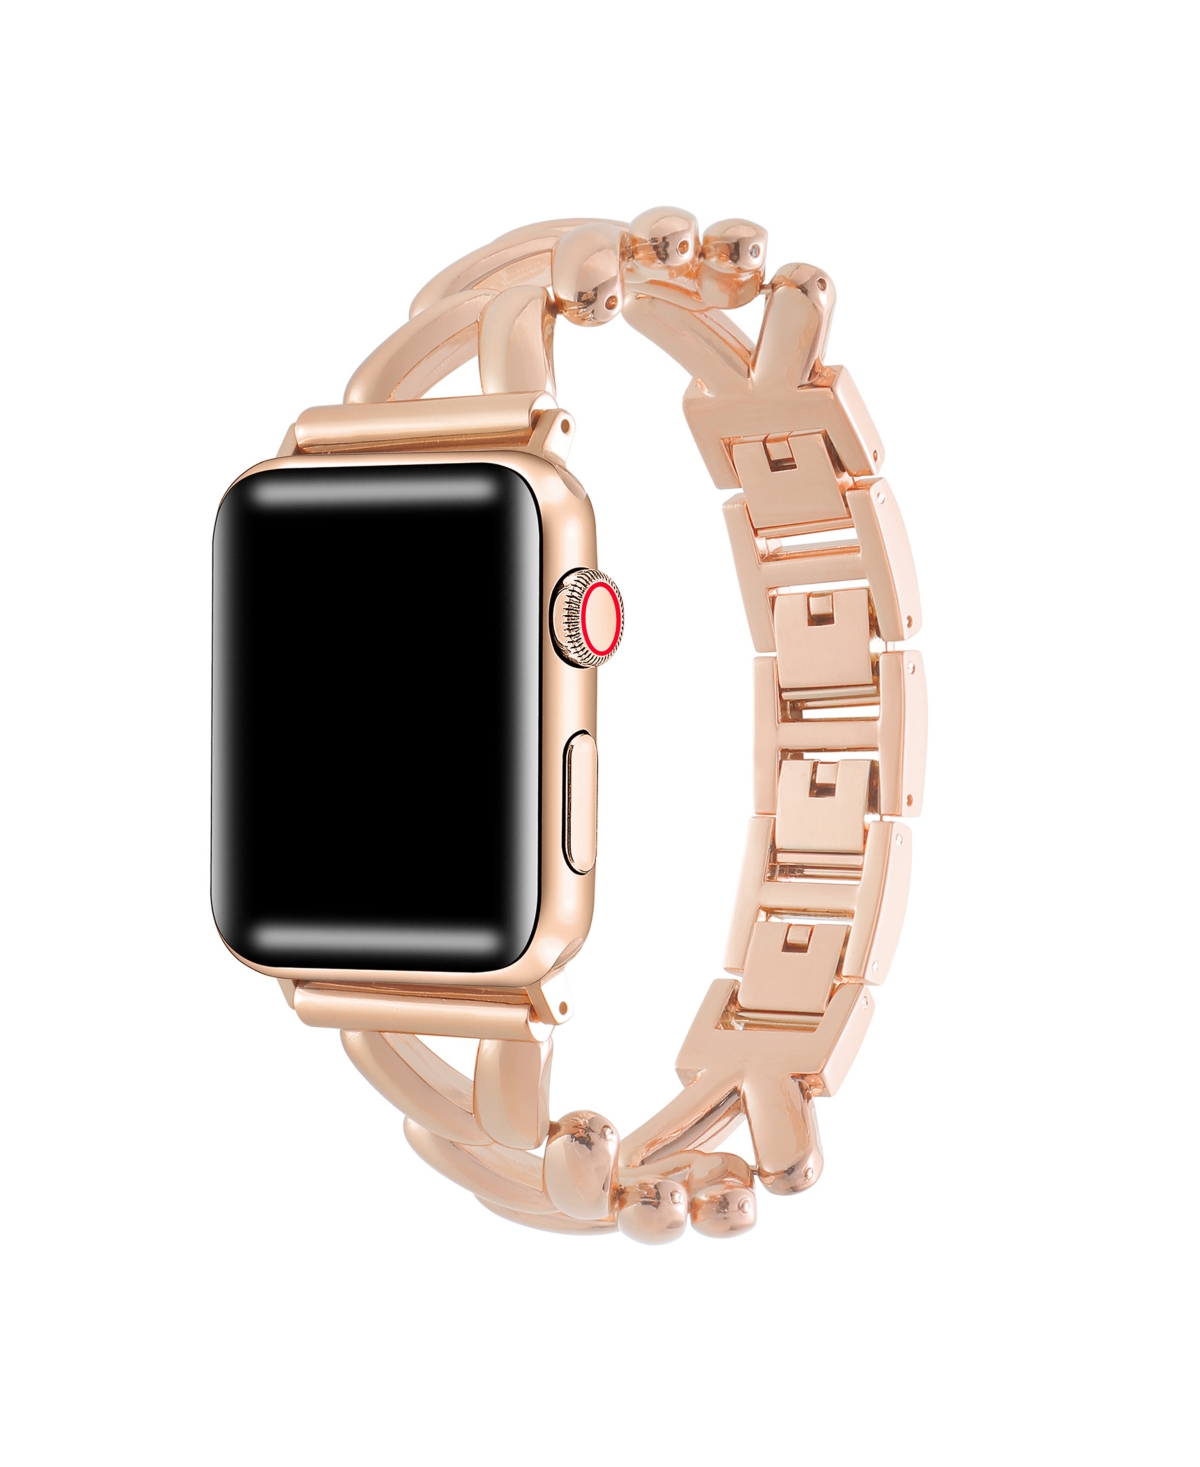 Women's Caroline Alloy Band for Apple Watch Size-38mm,40mm,41mm - Rose Gold